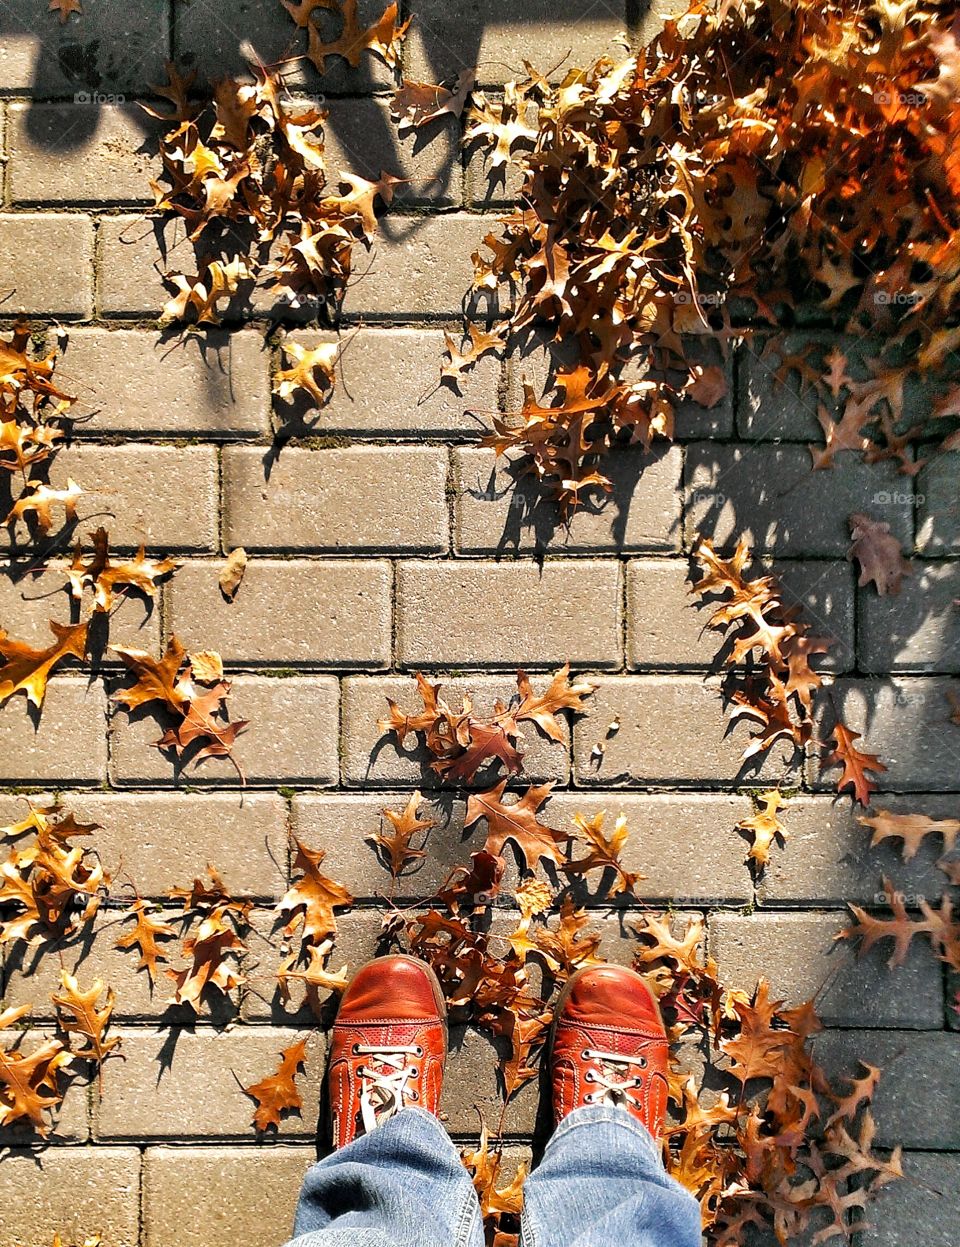 Looking down at autumn leaves. Looking down at autumn leaves lying on pavement